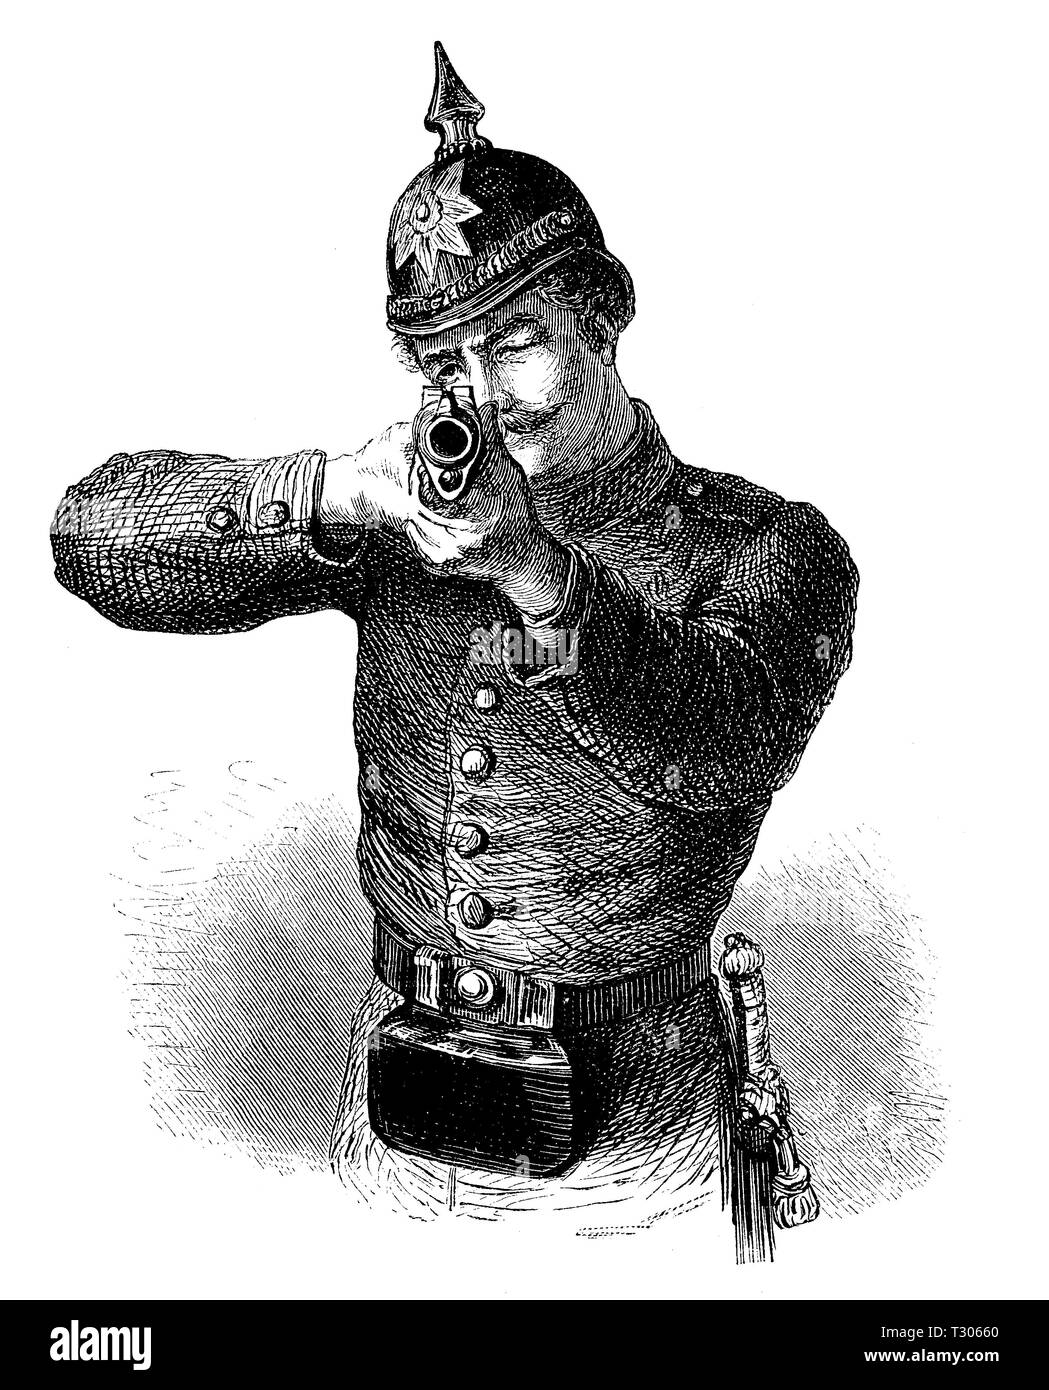 Digital improved reproduction, Shooter, Musketier, aims exactly at the viewer, Schütze, zielt genau auf den Betrachter, from an original print from the 19th century Stock Photo